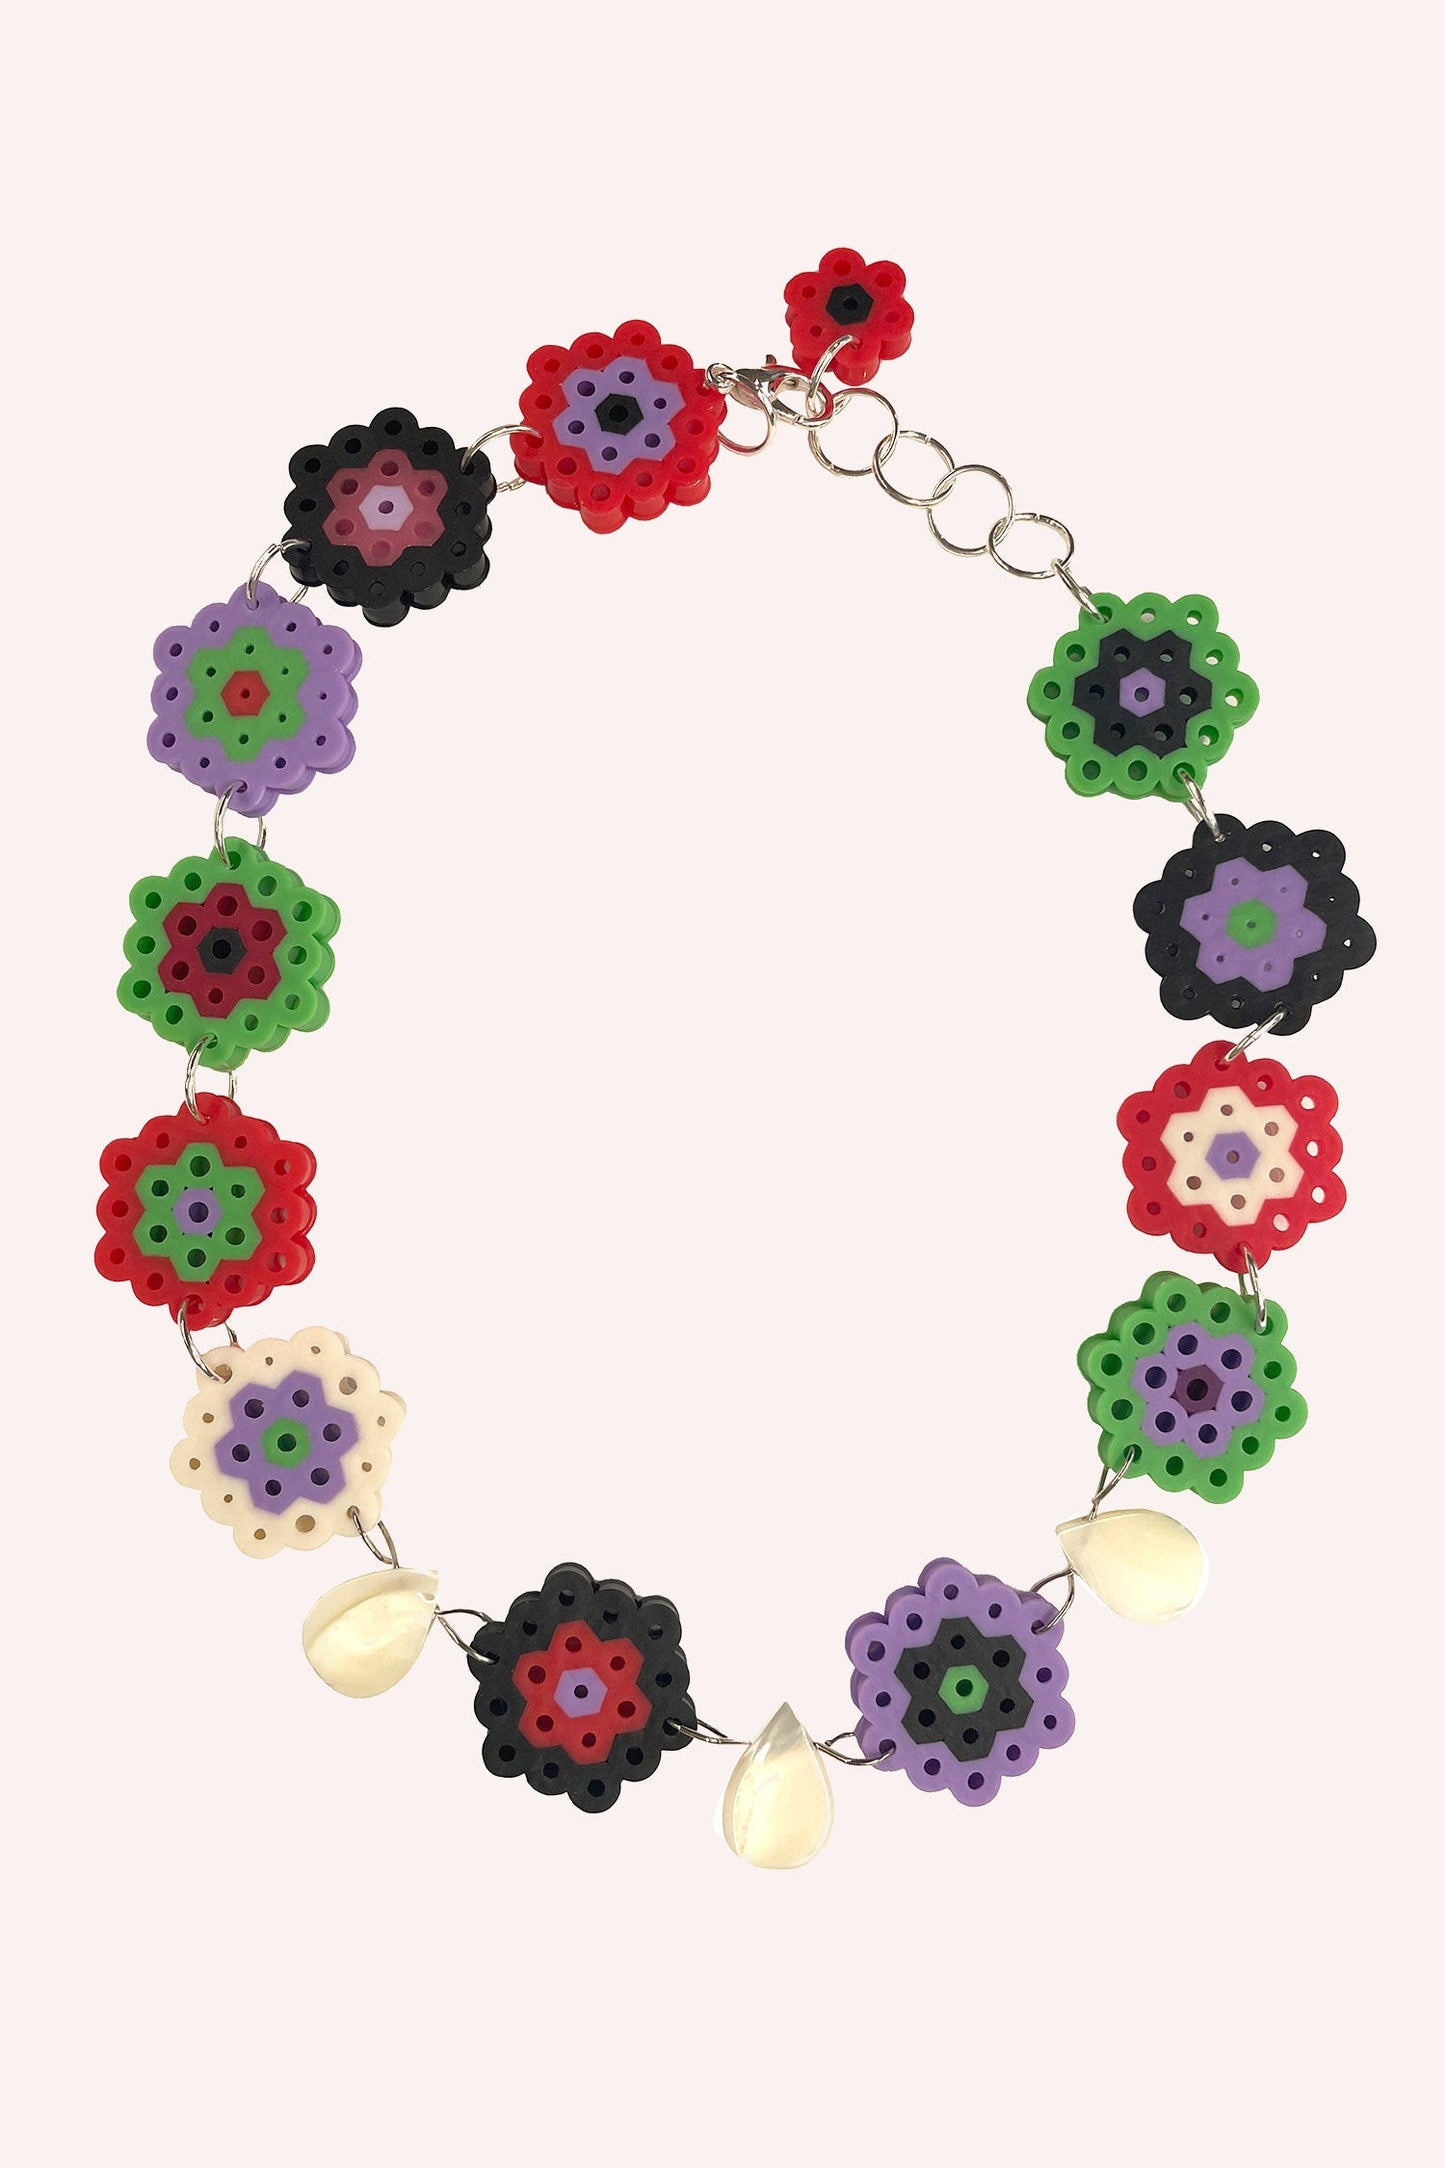 Daisy Chain Choker Red features 14 daisy-like beads linked together with a chain, 3 shells in front